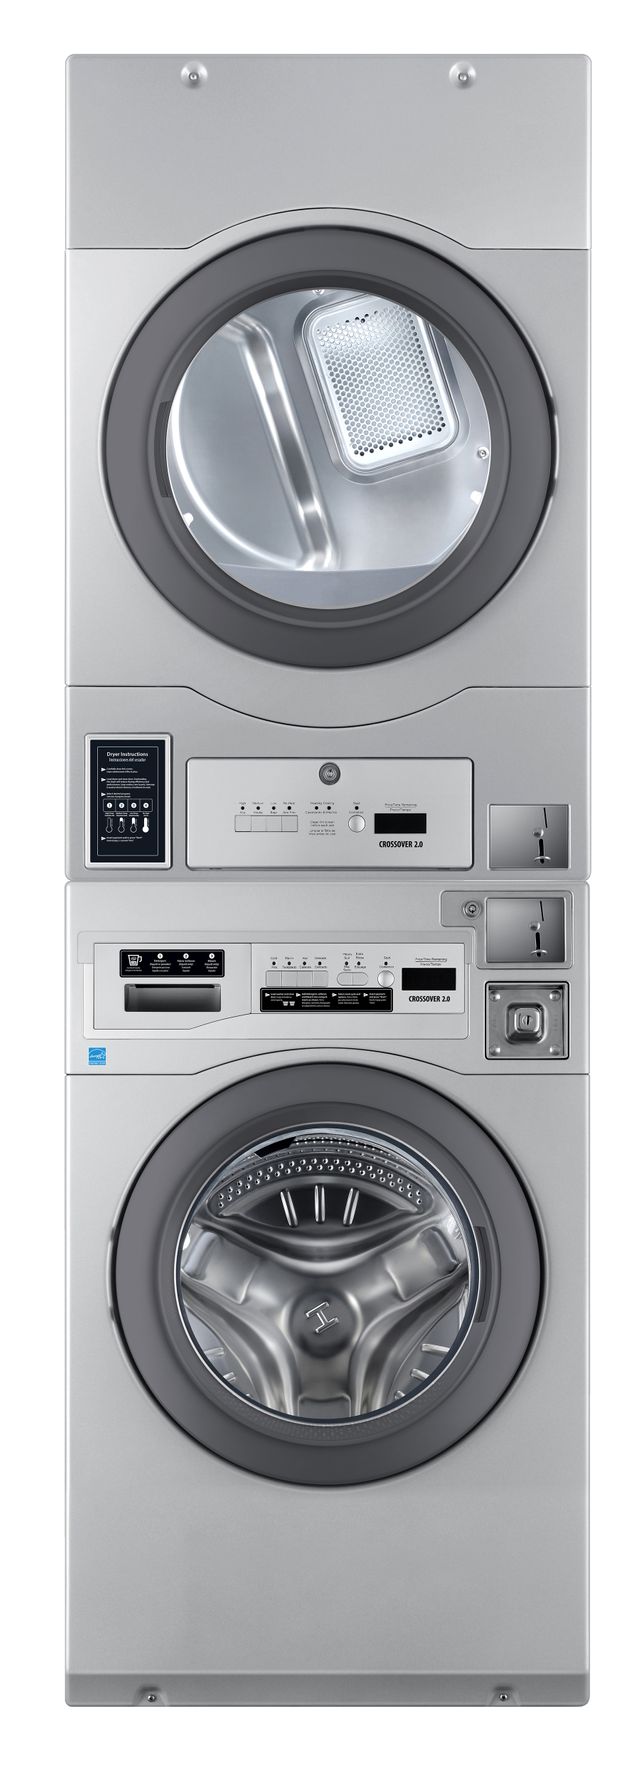 Crossover True Commercial Laundry - 7.0 Cu. Ft. Silver Heavy Duty Bottom Control Gas Dryer with Coin Option/Card Ready Included (Stacked application) 1